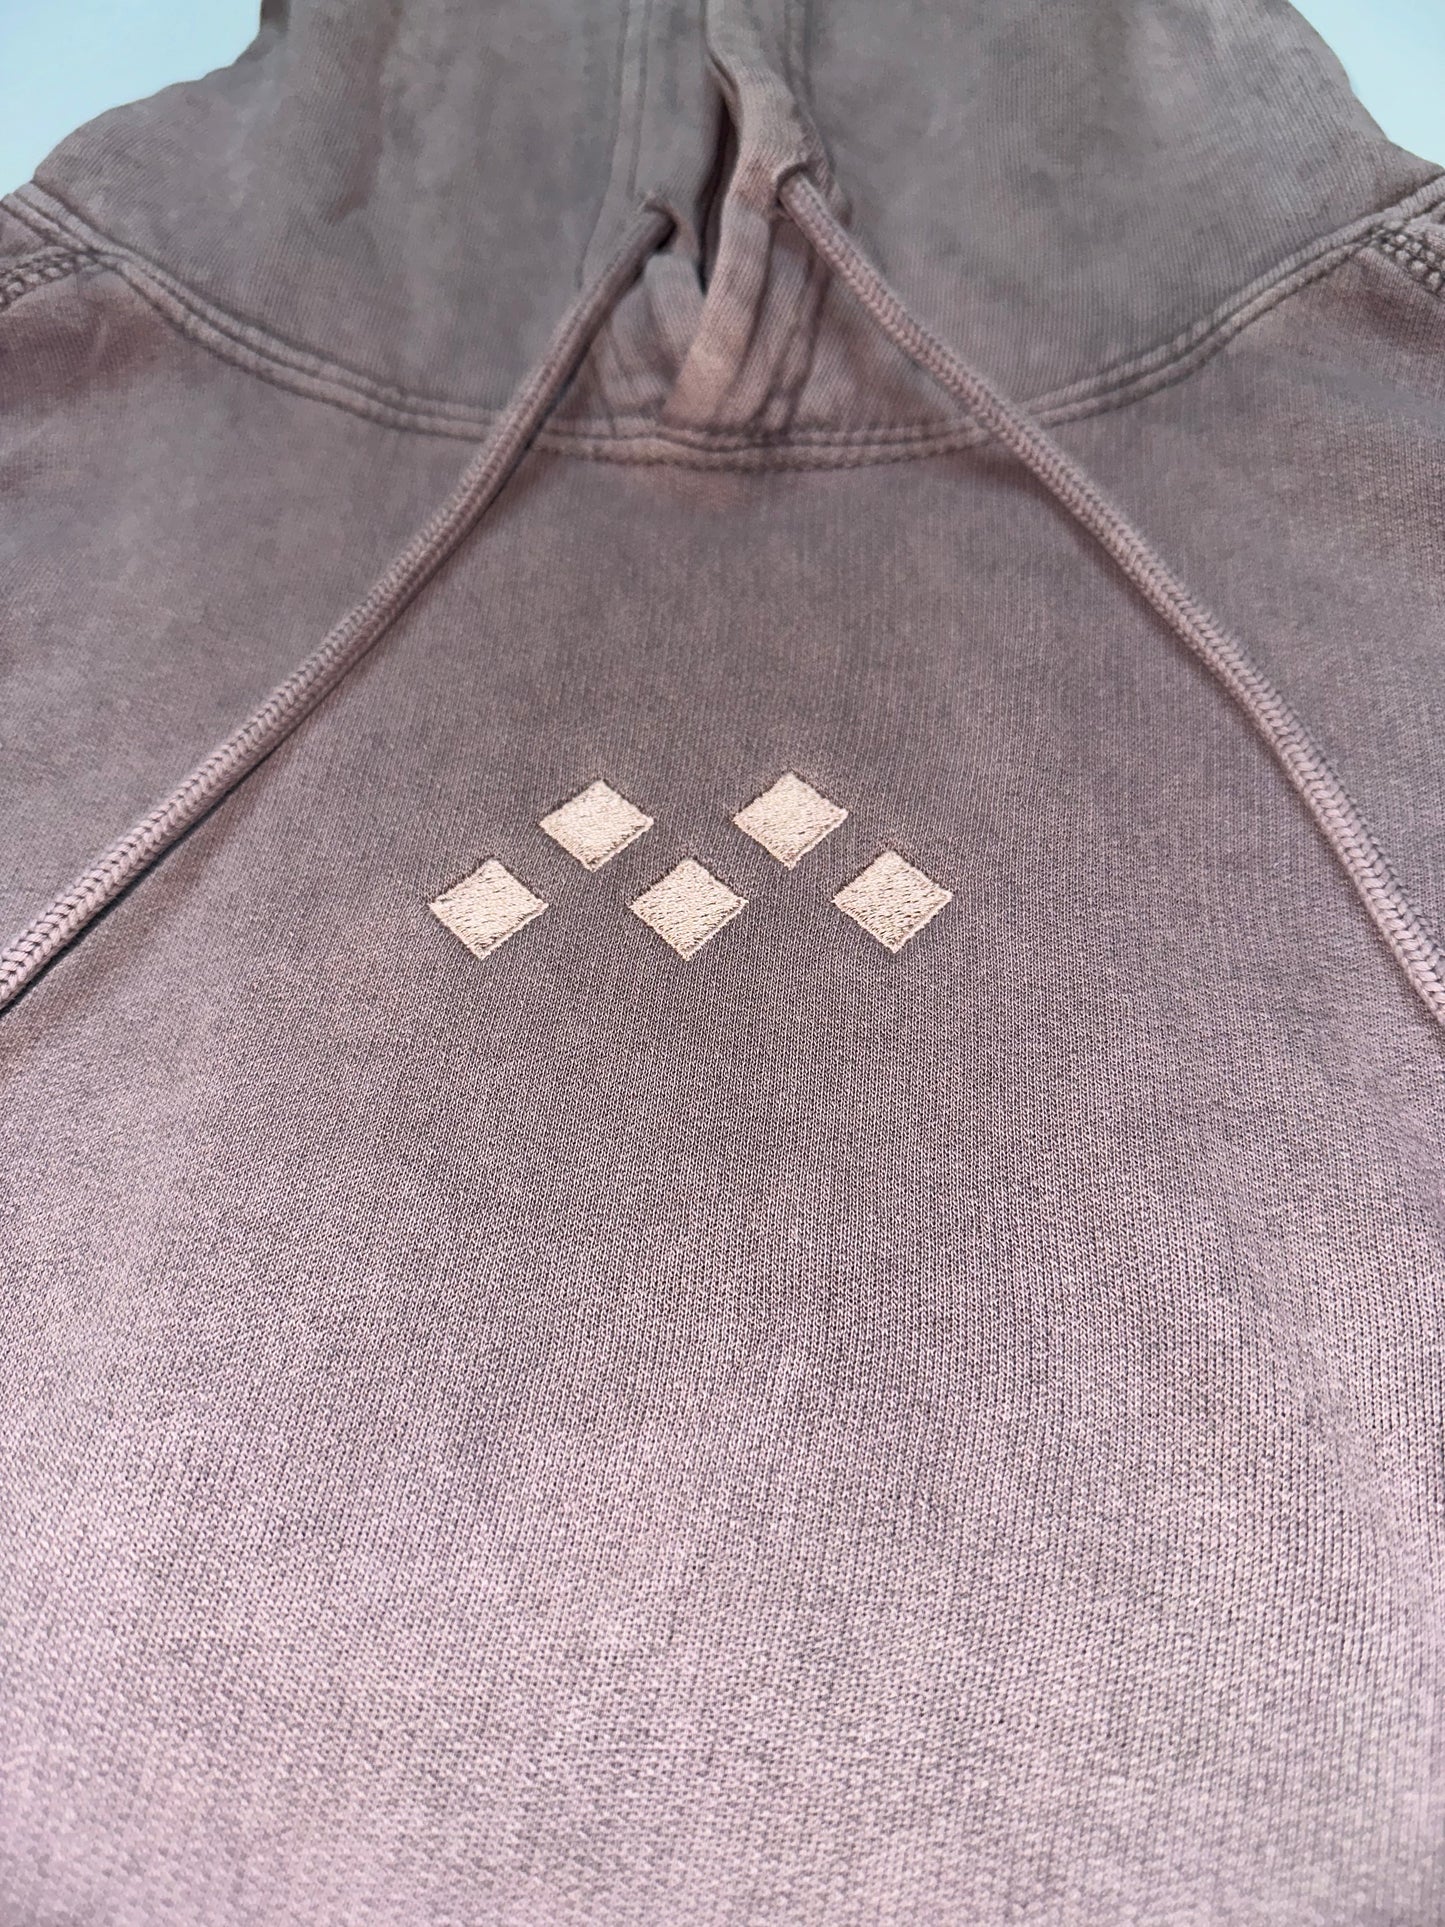 Vived-Mota Co. Embroidered Vintage Mineral Wash Hoodie “Dusty Mauve”